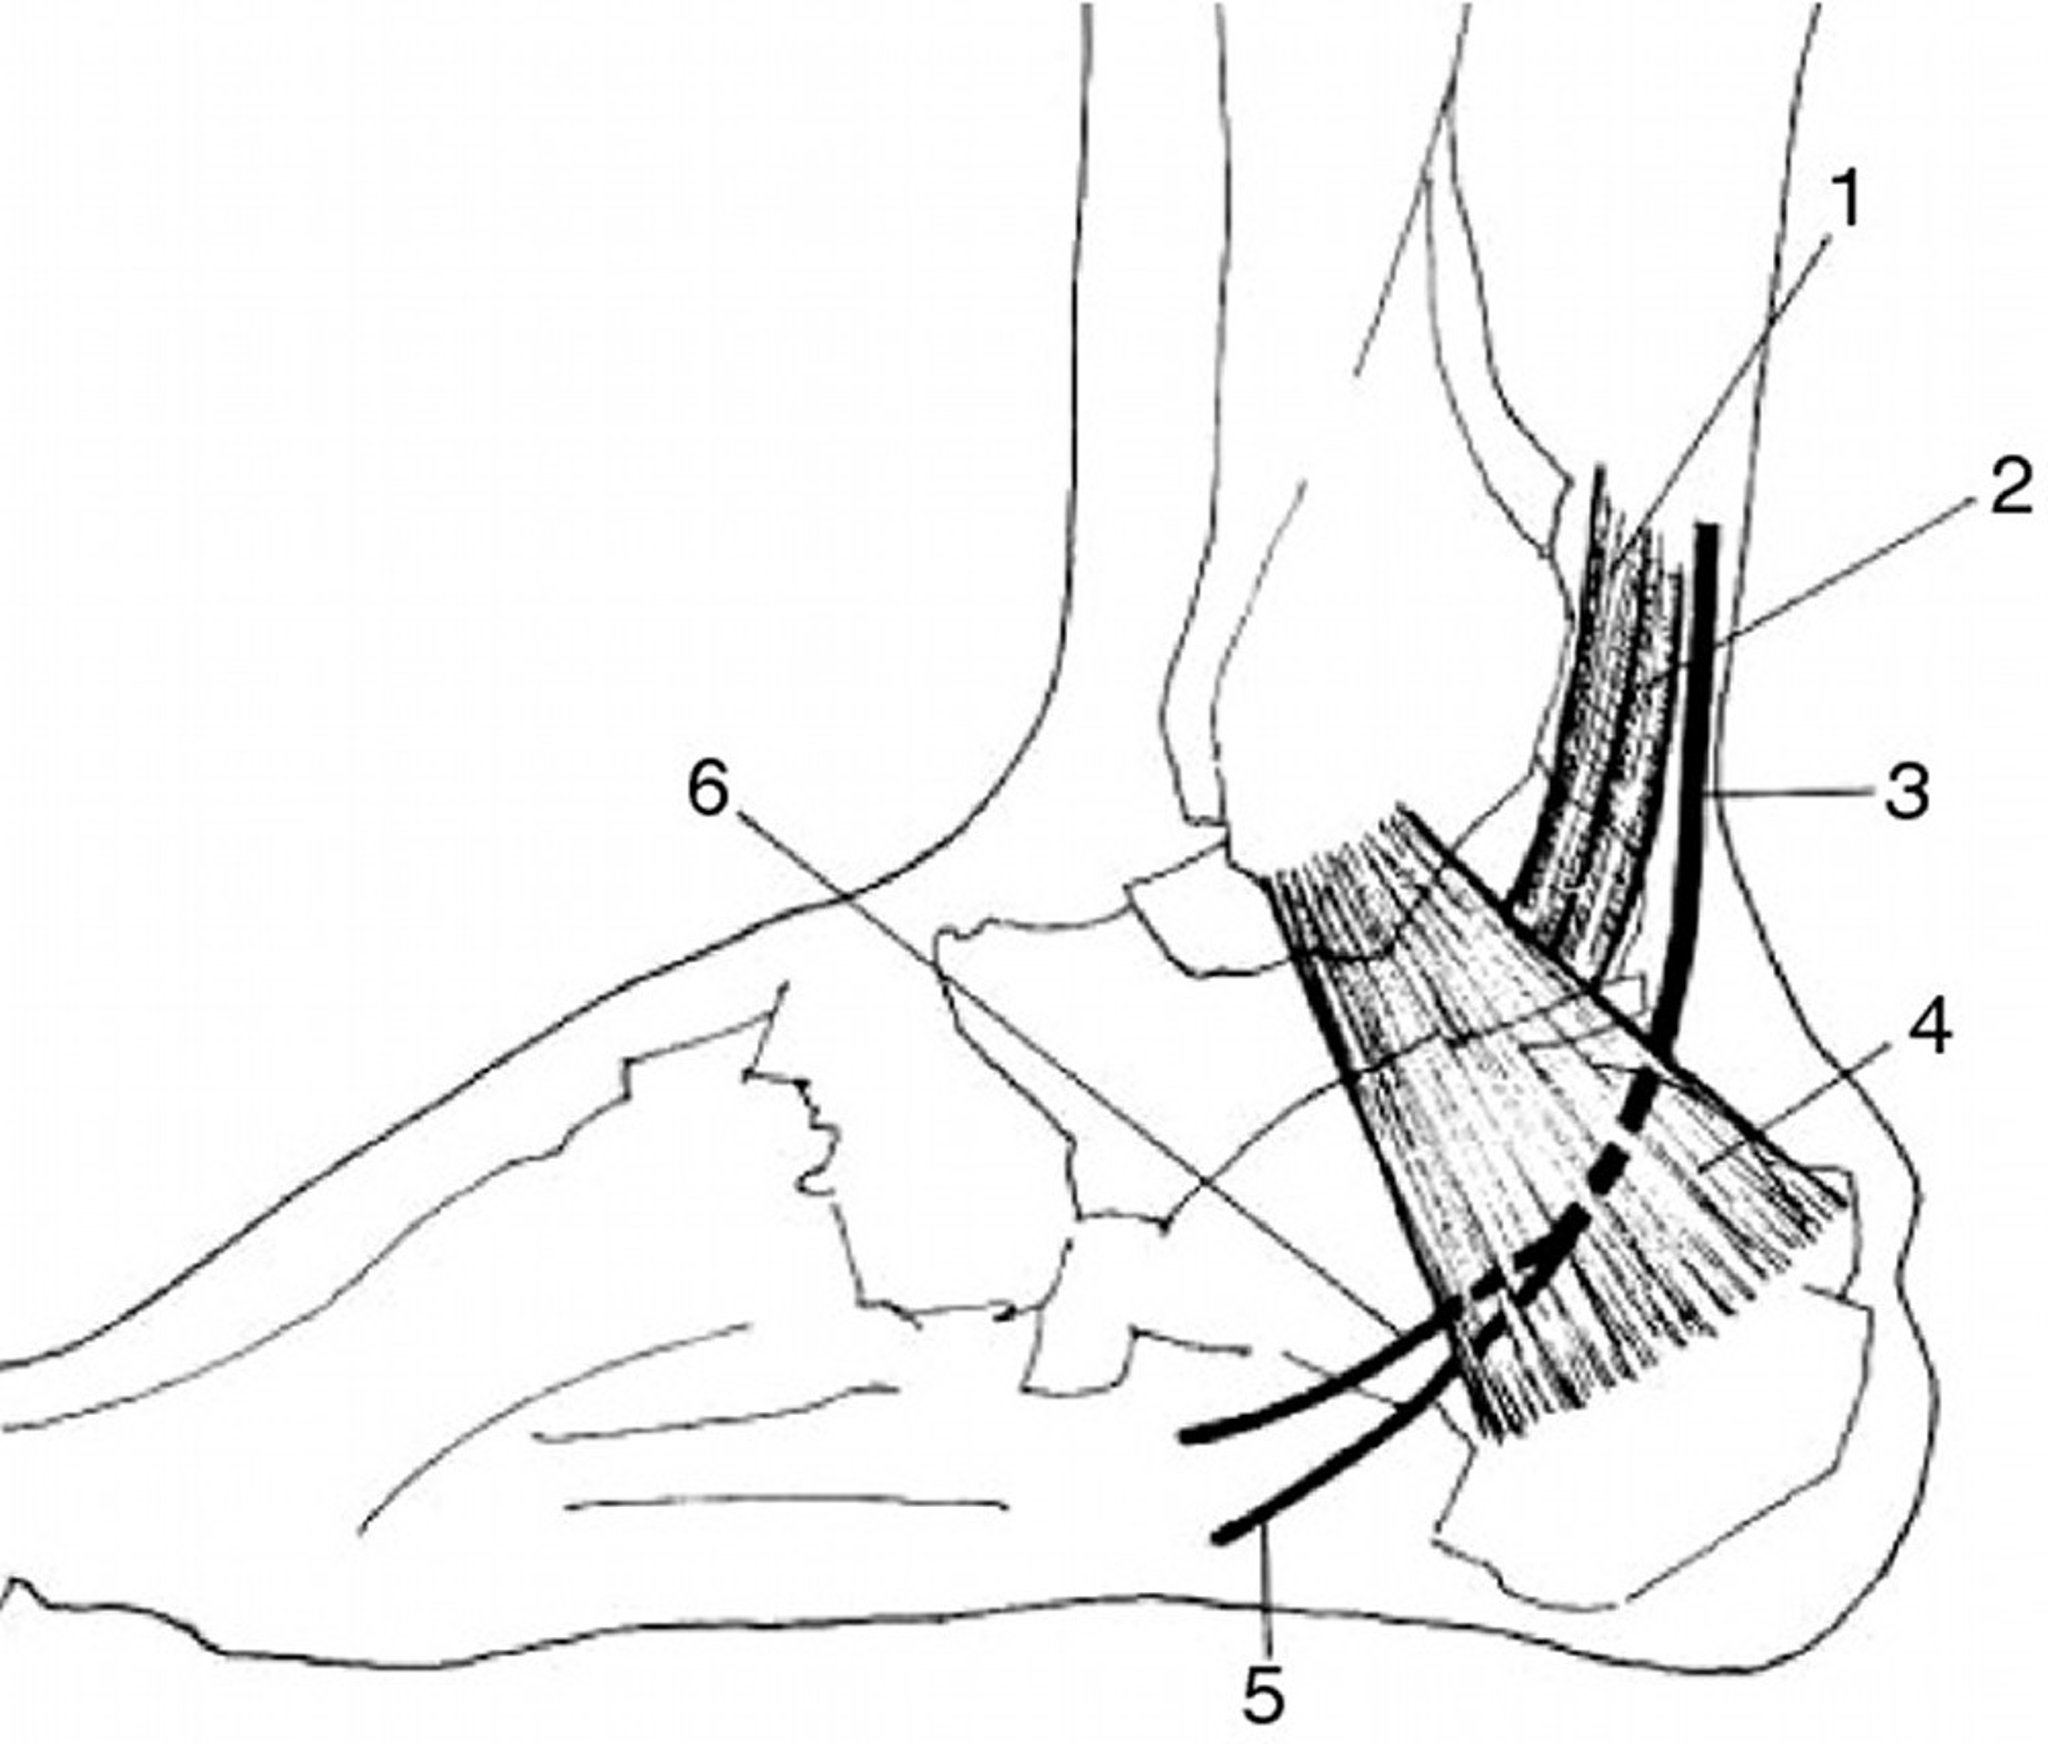 Medial and Lateral Plantar Nerve Anatomy